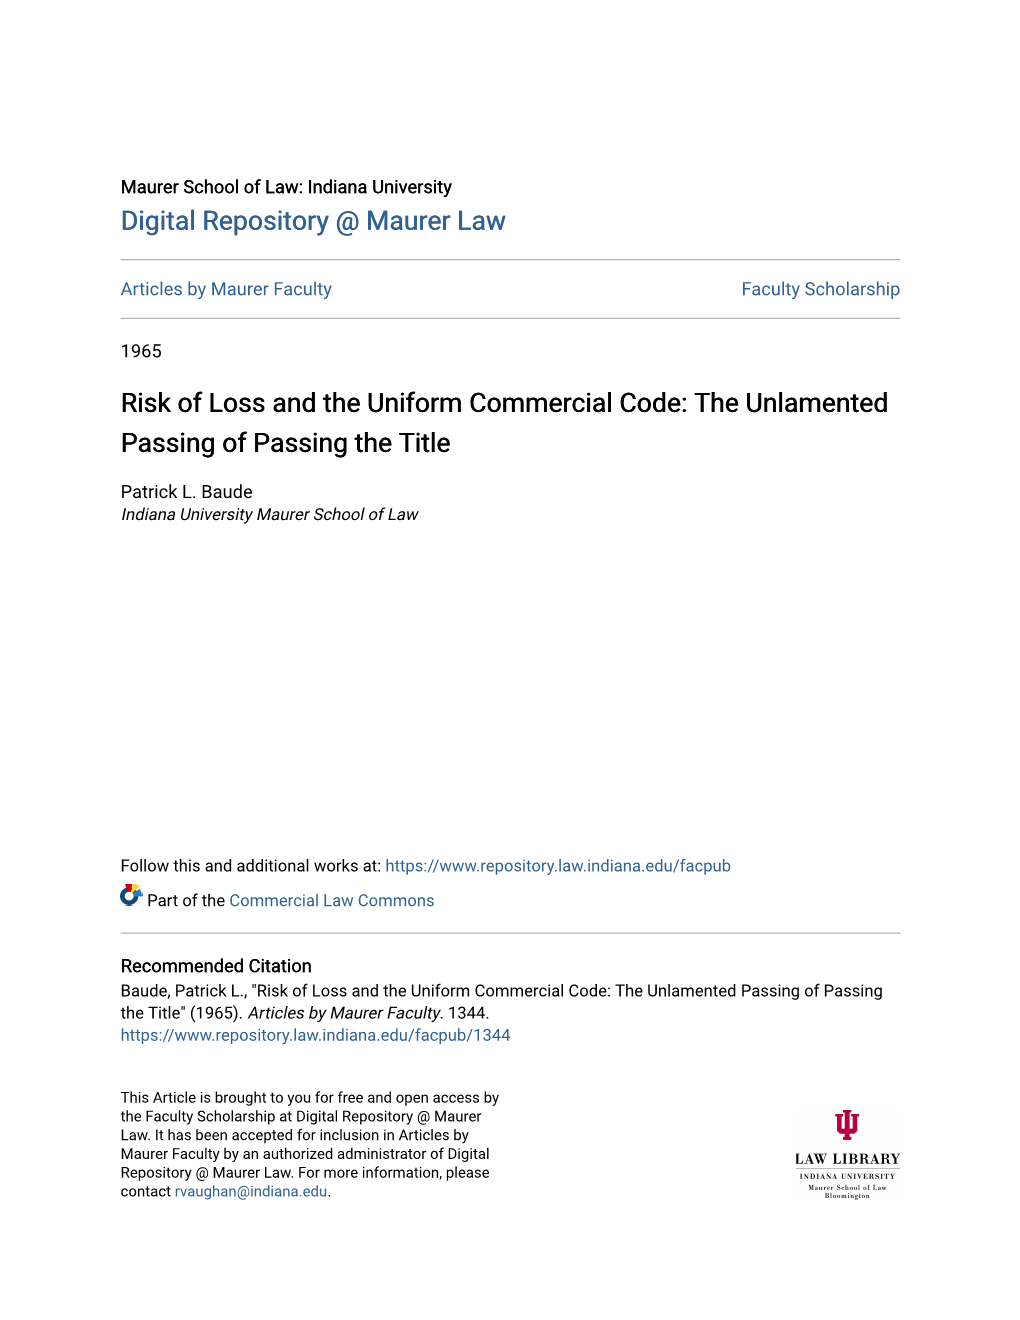 Risk of Loss and the Uniform Commercial Code: the Unlamented Passing of Passing the Title